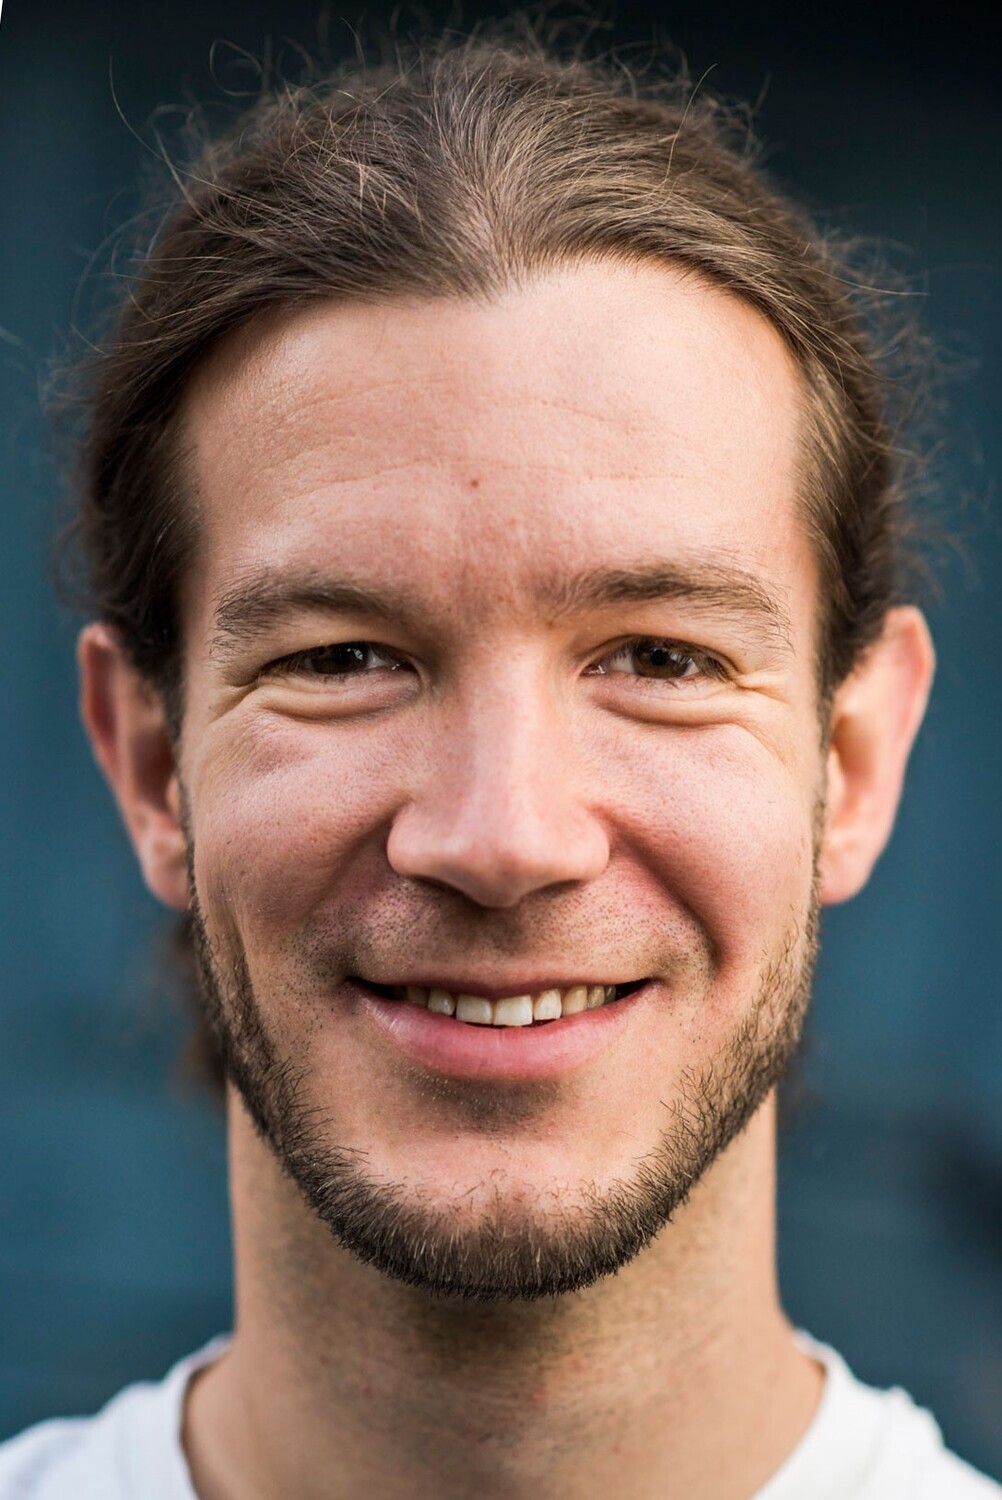 The computational neuroscientist Professor Alexander Ecker from the University of Göttingen and the Max Planck Institute for Dynamics and Self-Organization (MPIDS) has received a Starting Grant from the European Research Council (ERC).